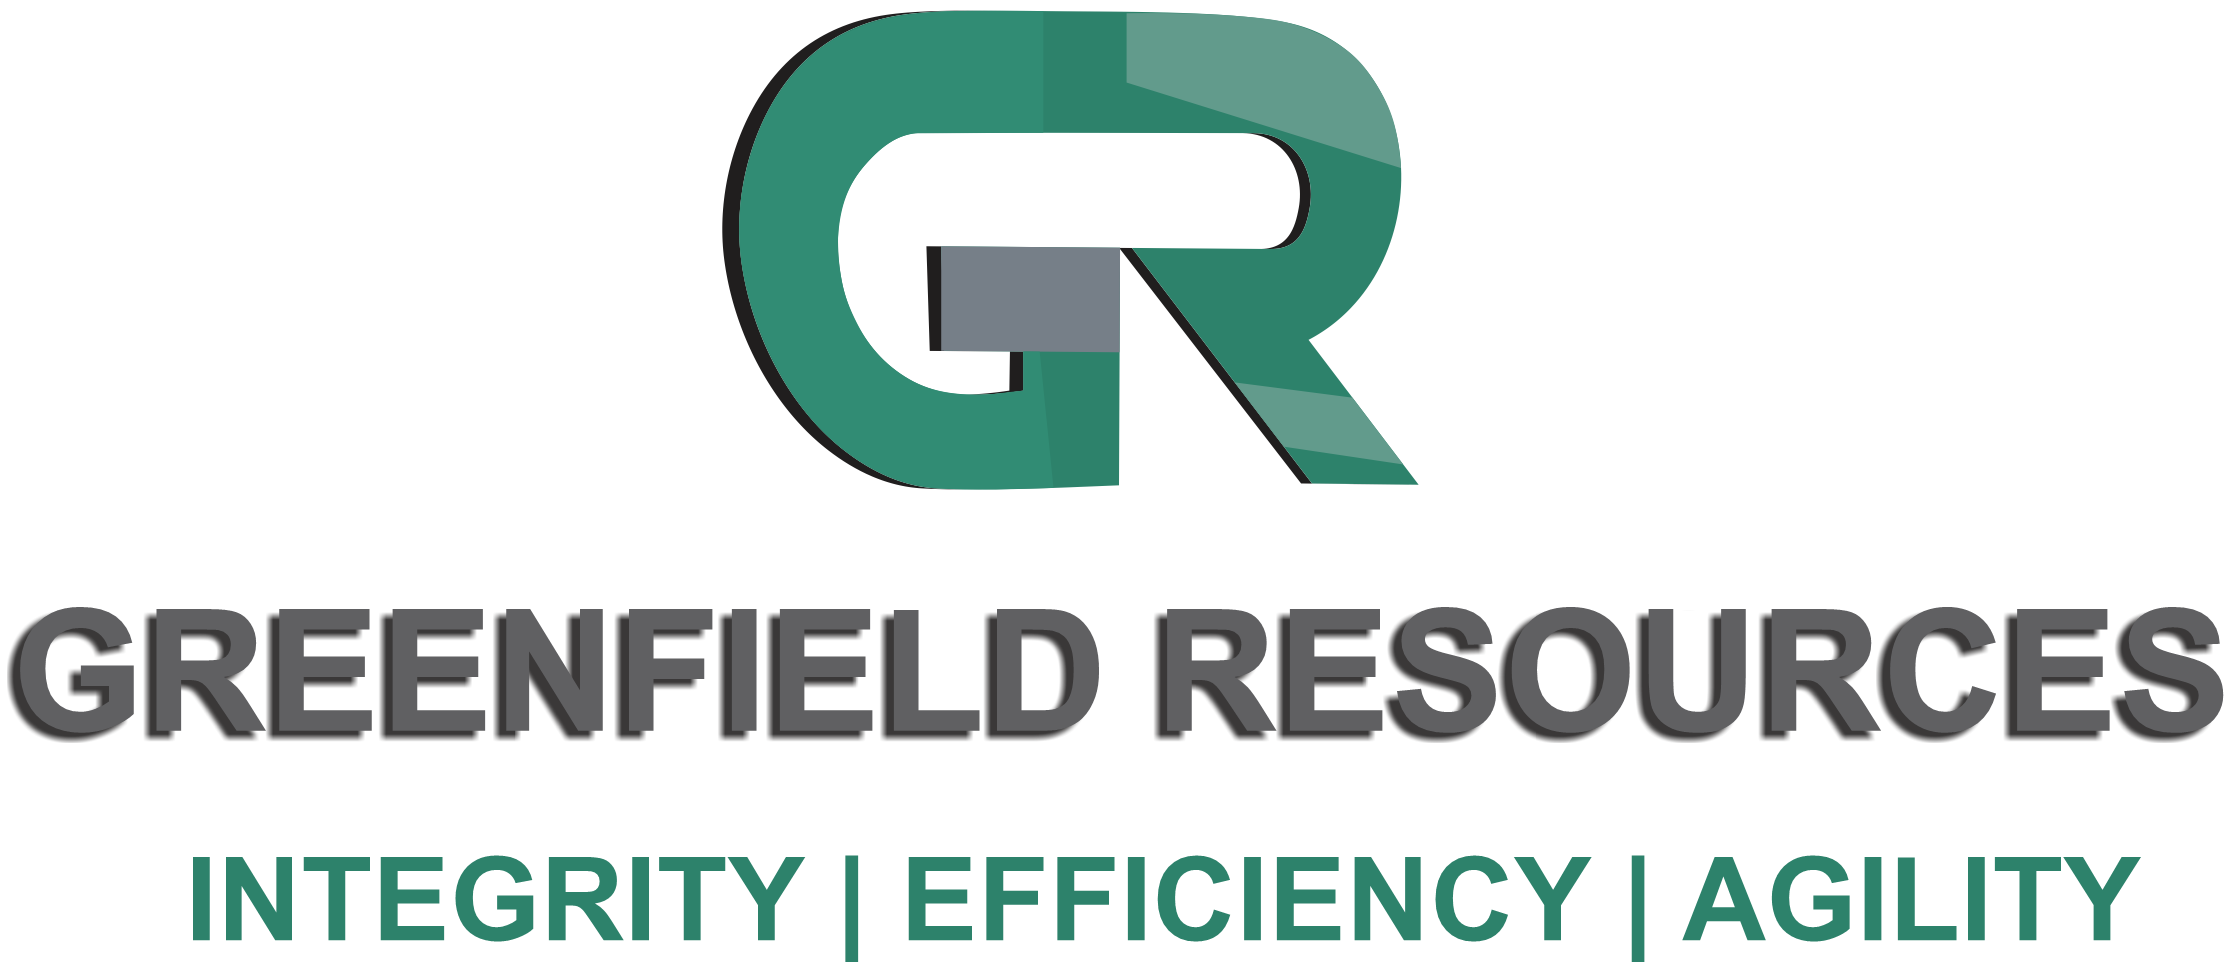 Greenfield Resources